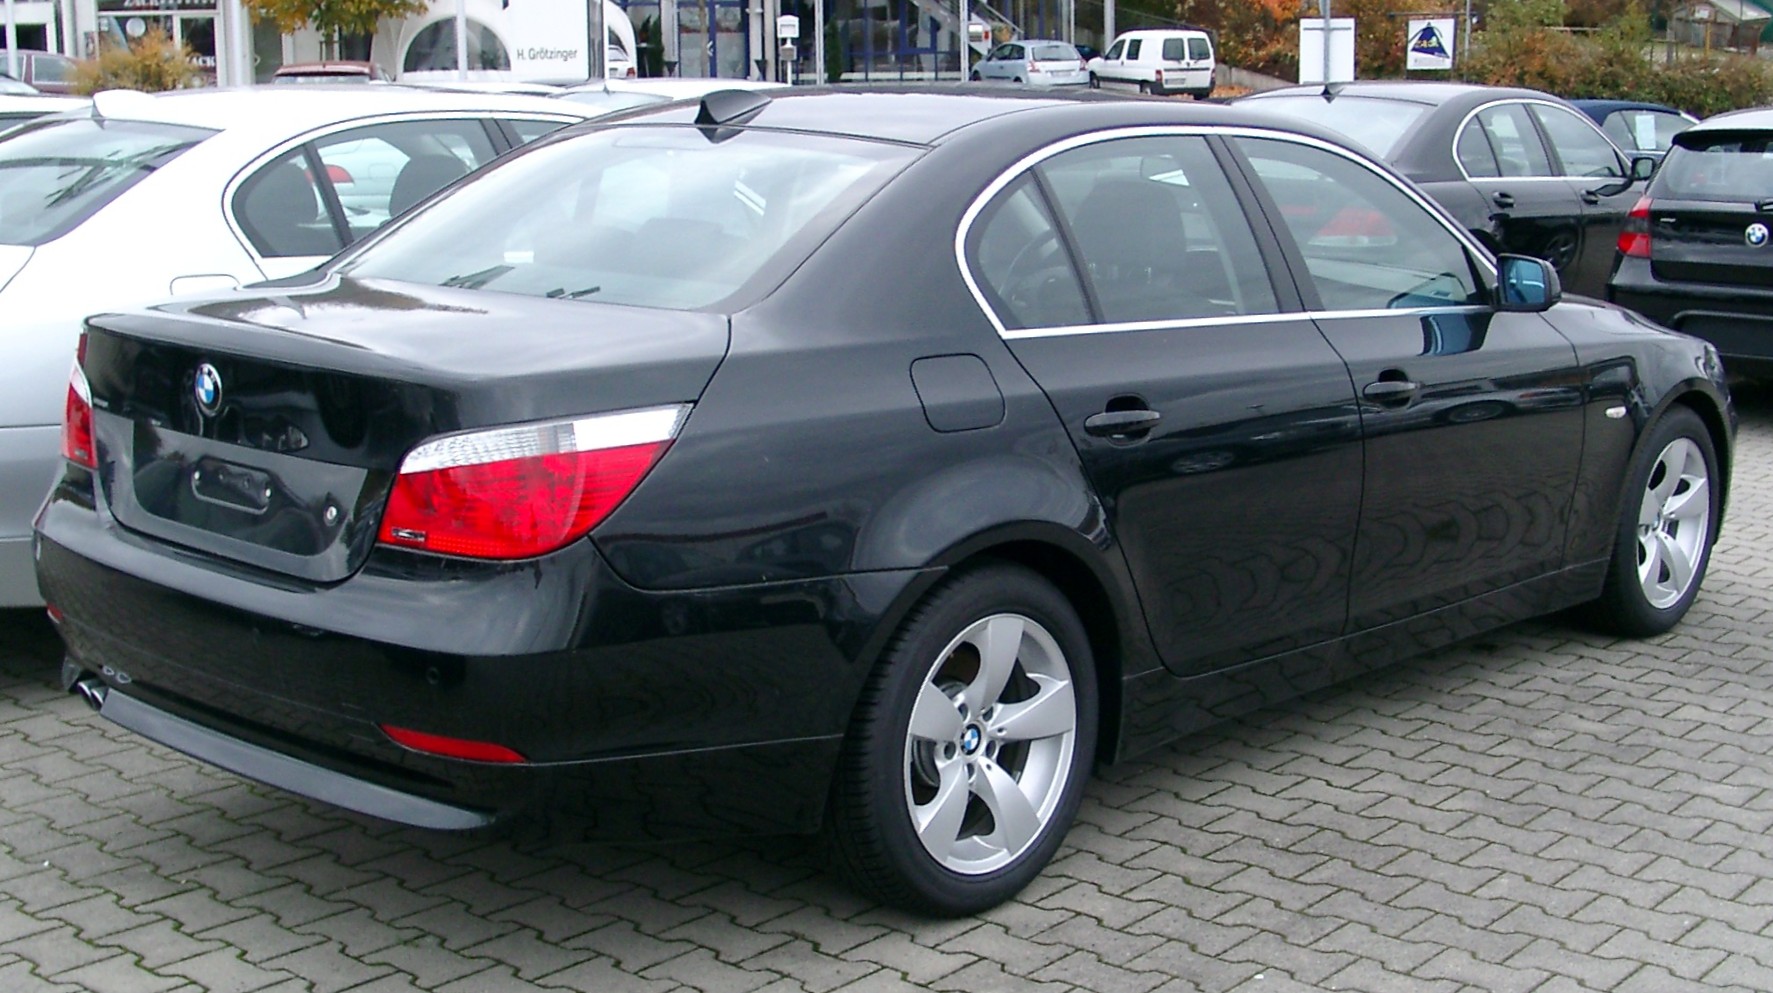 File:BMW E60 front 20080417.jpg - Wikimedia Commons